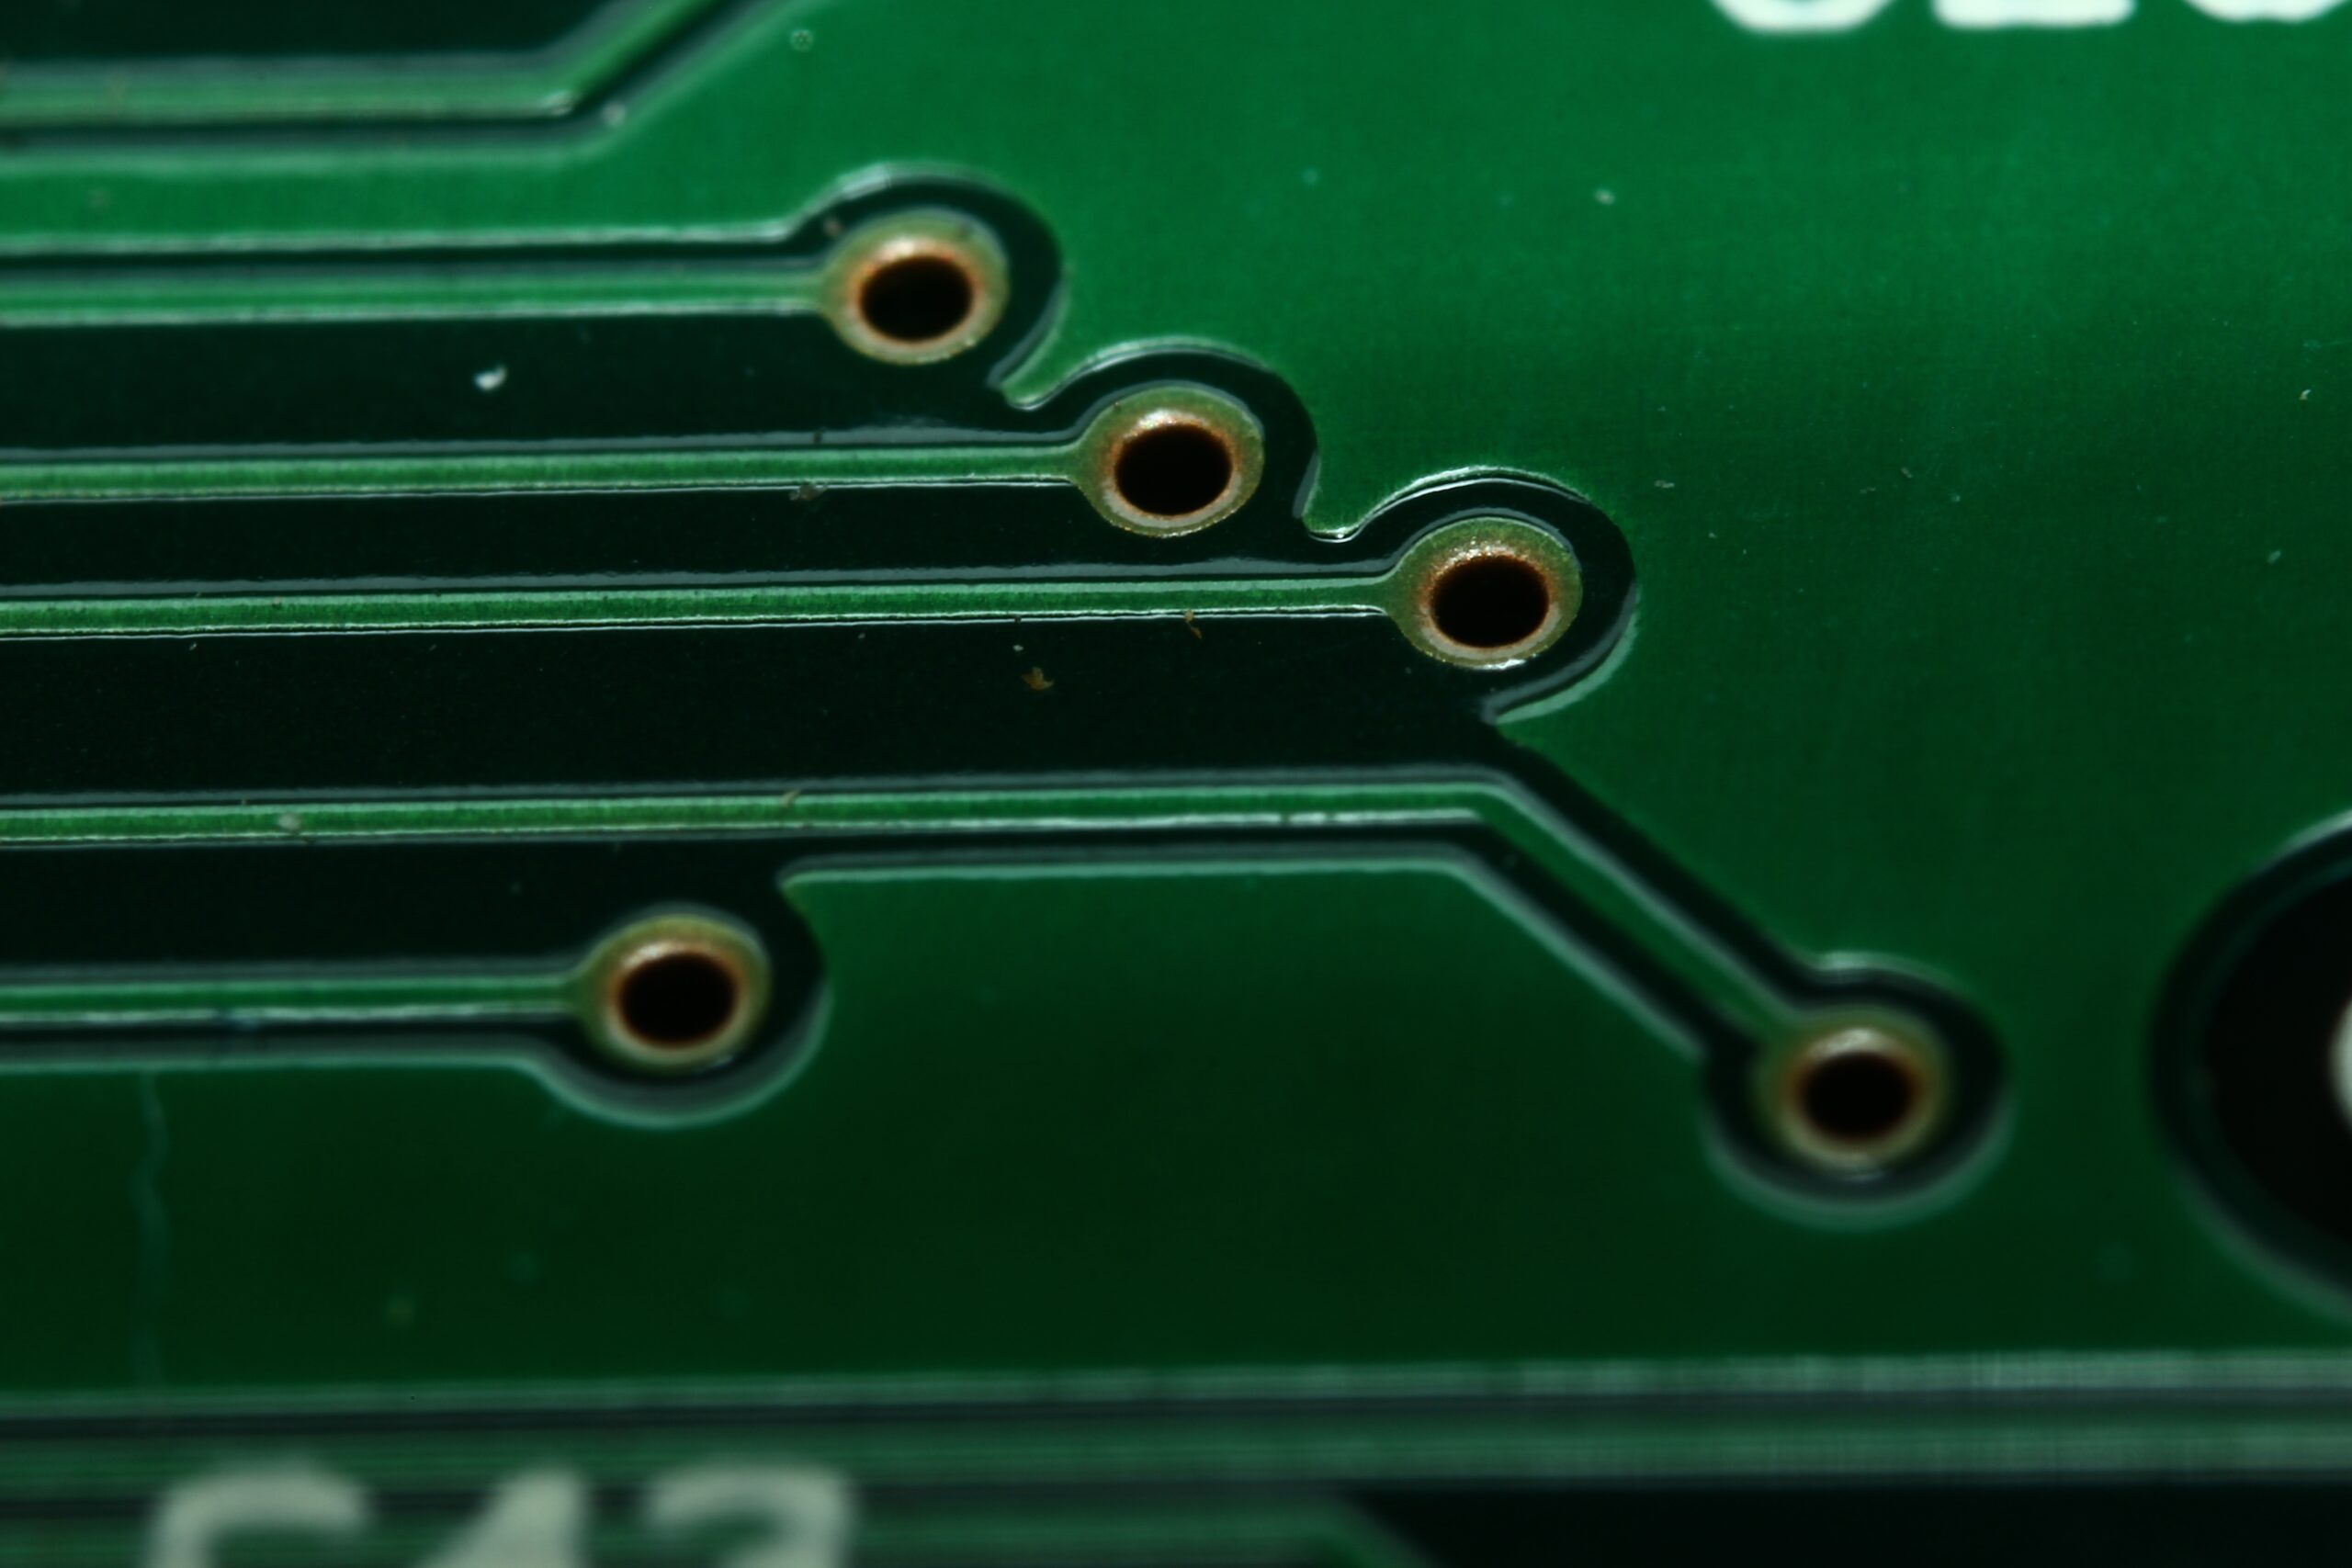 What to Make of U.S. Government Will Support Domestic PCB Manufacturing